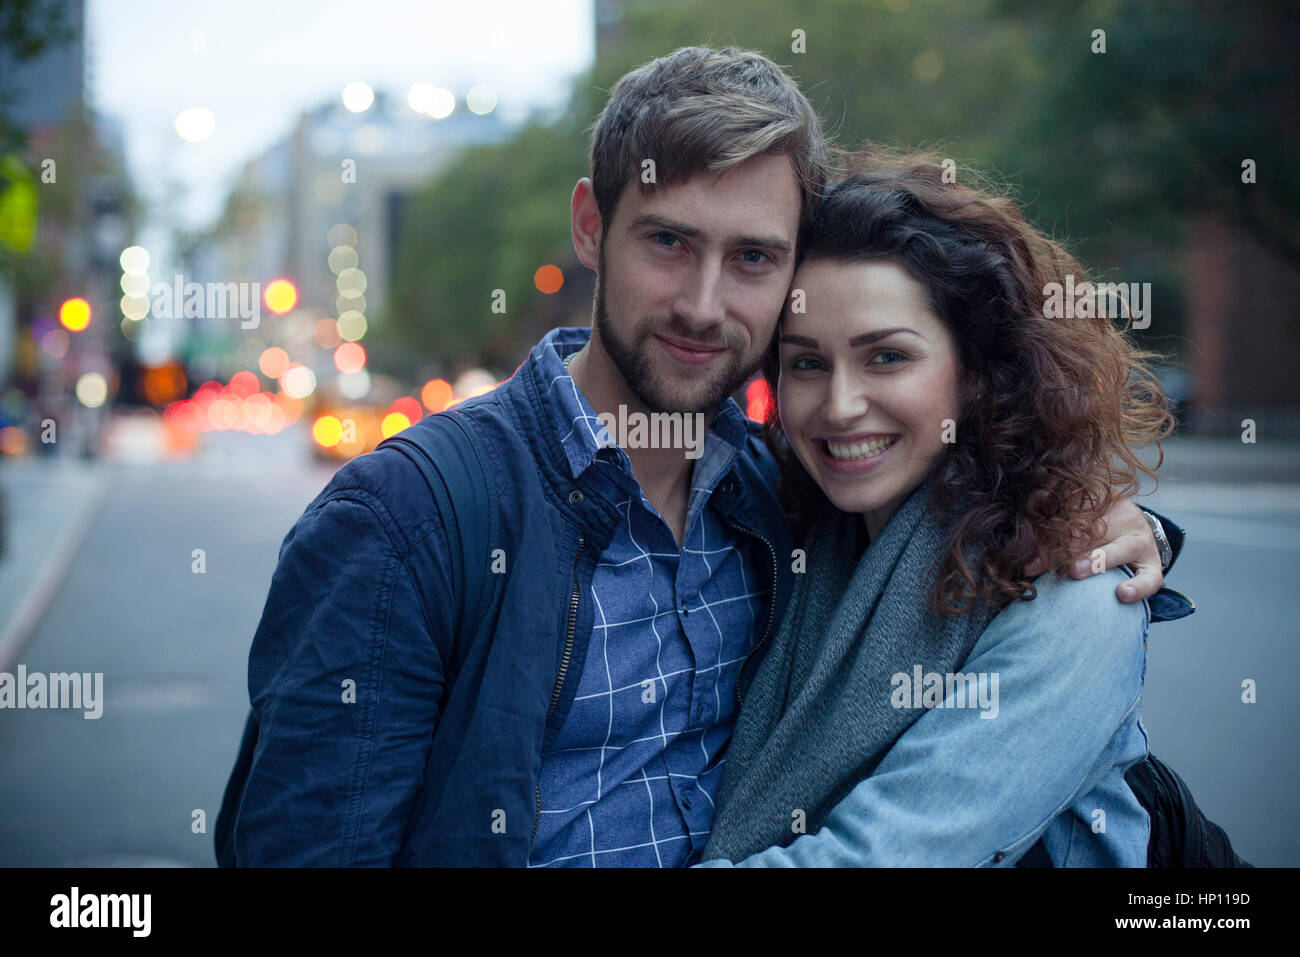 Couple on city street in the evening, portrait Stock Photo